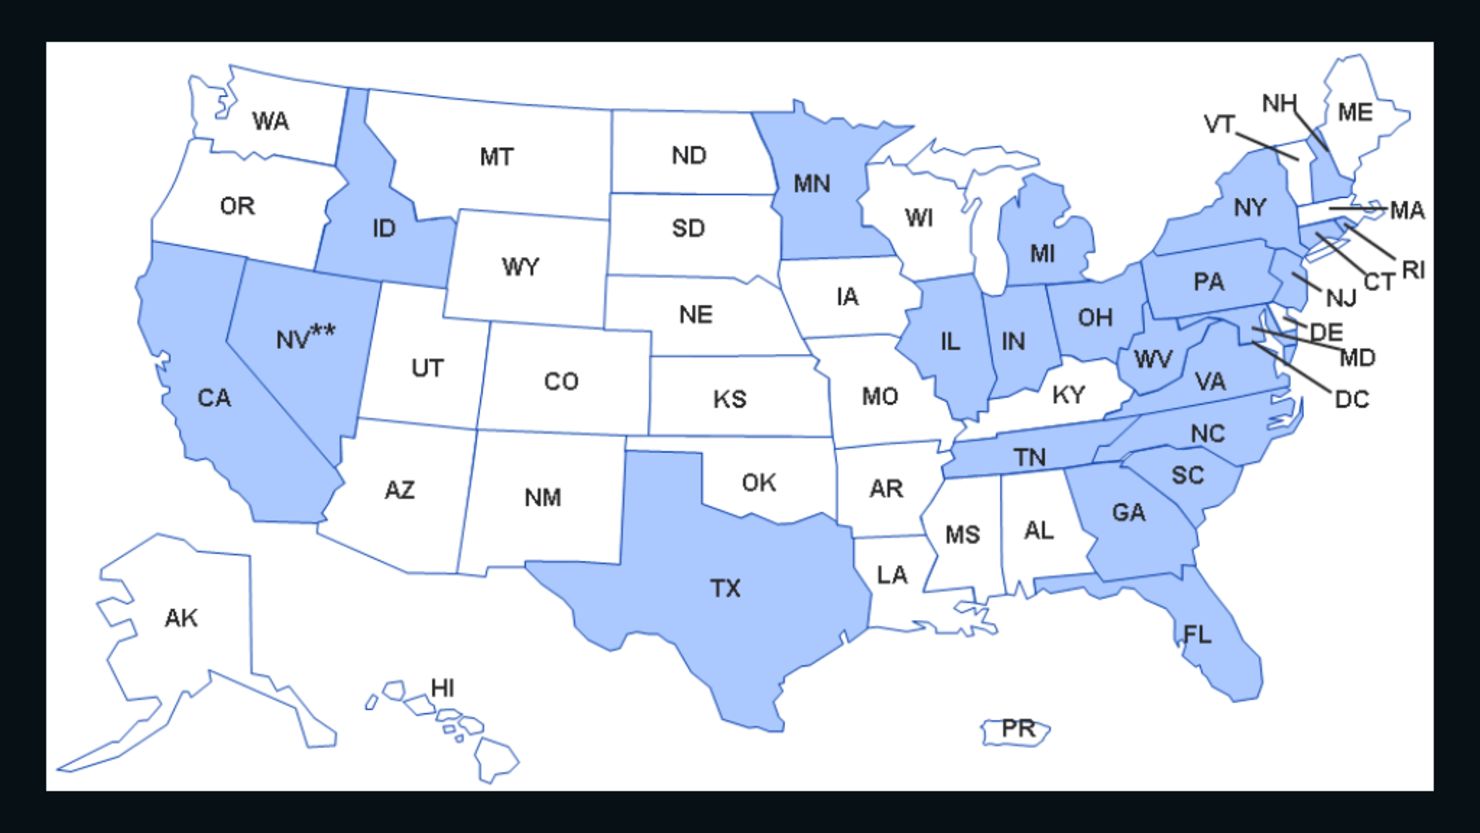 This map from the CDC shows the states with healthcare facilities that received the possibly contaminated steroid.